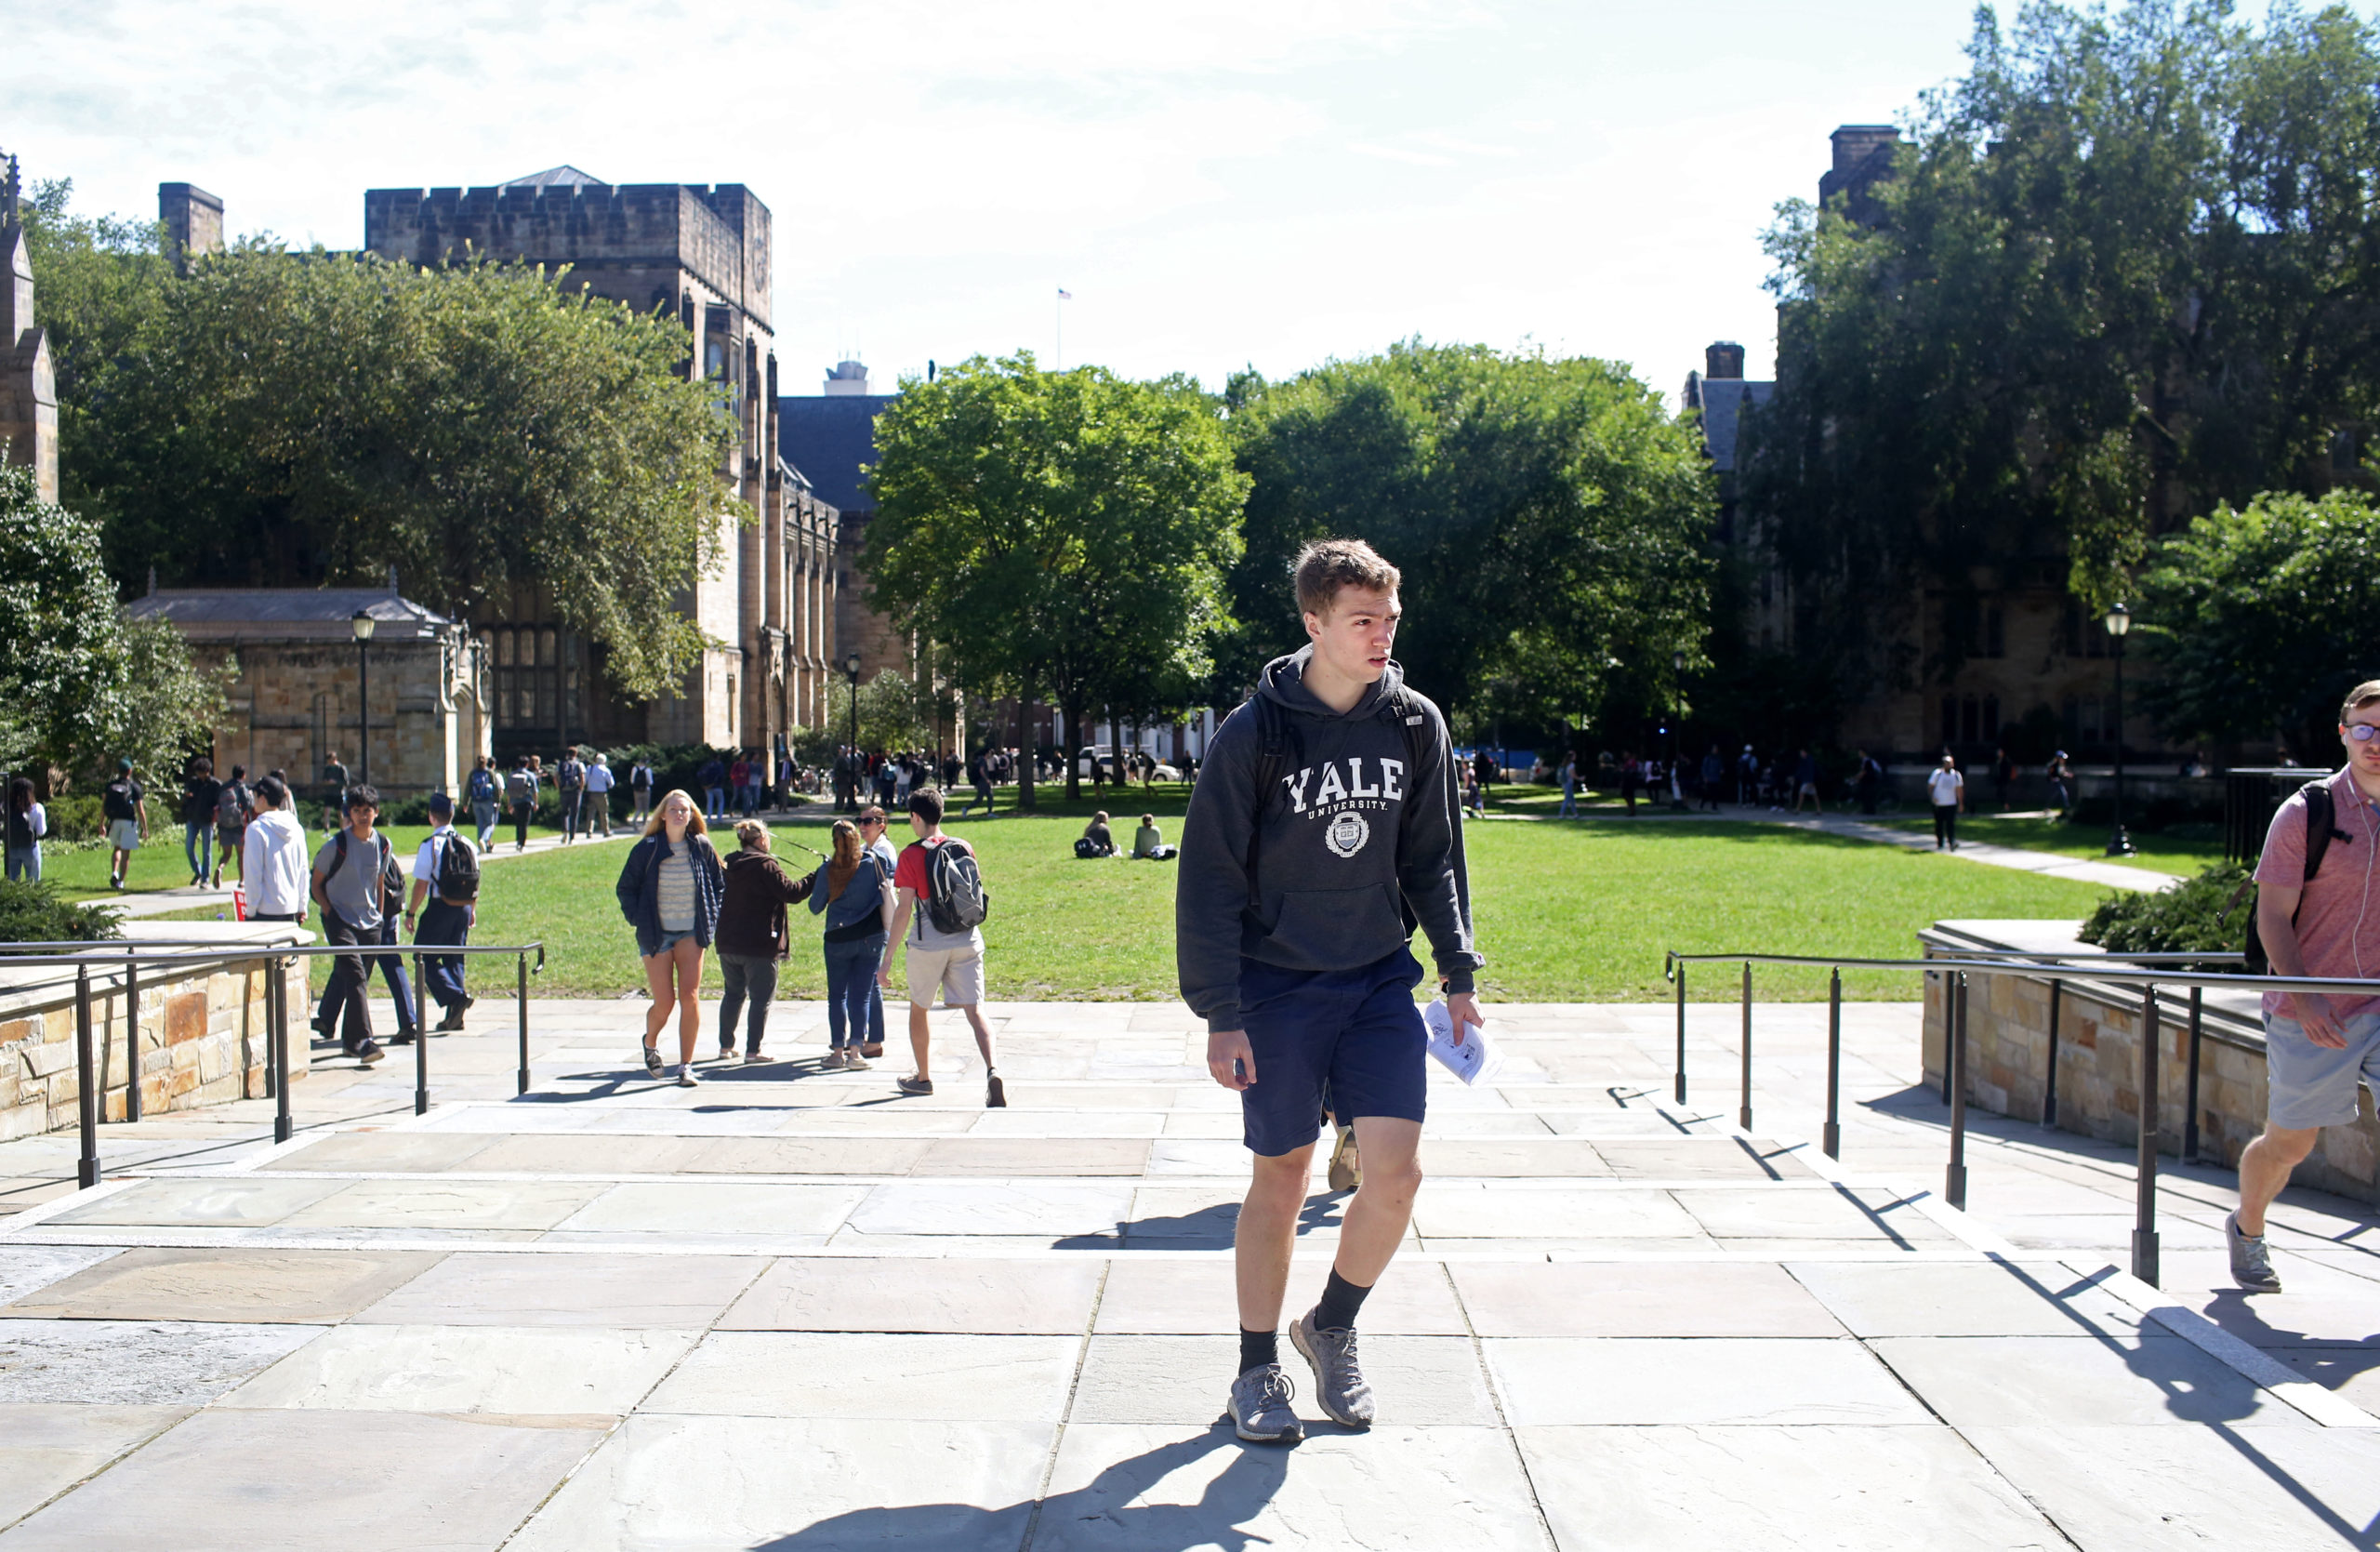 Students walk through the campus of Yale University on the day the U.S. Senate Judiciary Committee was holding hearings for testimony from Dr. Christine Blasey Ford and Supreme Court nominee Brett Kavanaugh September 27, 2018 in New Haven, Connecticut. Blasey Ford, a professor at Palo Alto University and a research psychologist at the Stanford University School of Medicine, has accused Kavanaugh of sexually assaulting her during a party in 1982 when they were high school students in suburban Maryland. (Photo by Yana Paskova/Getty Images)